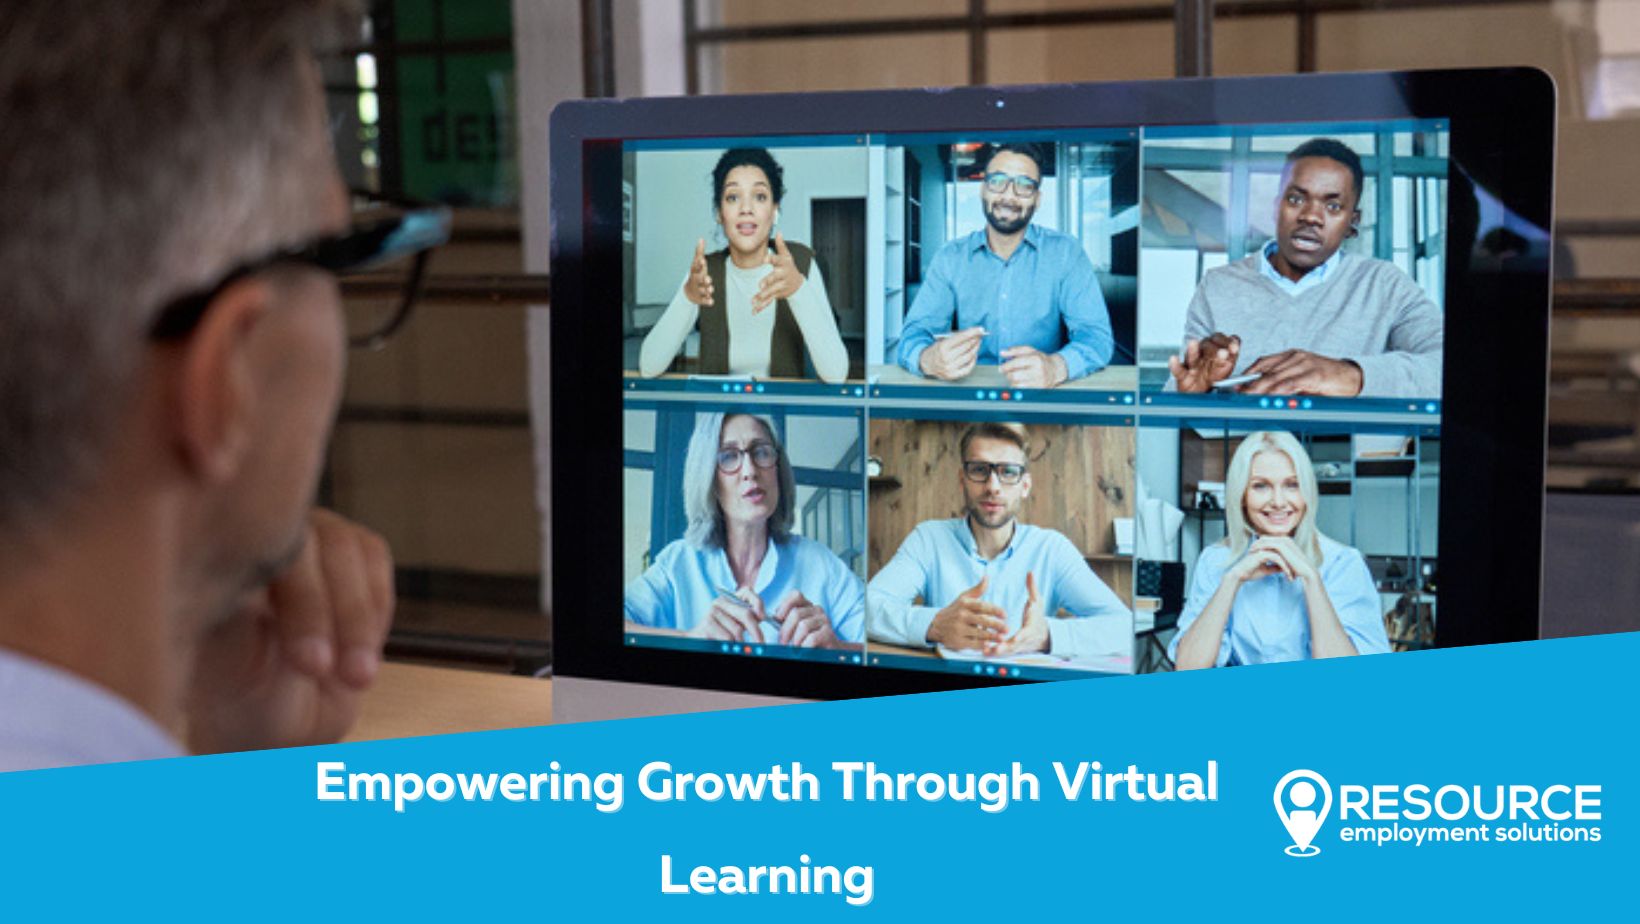  Empowering Growth Through Virtual Learning: Upskilling and Reskilling in the Digital Age